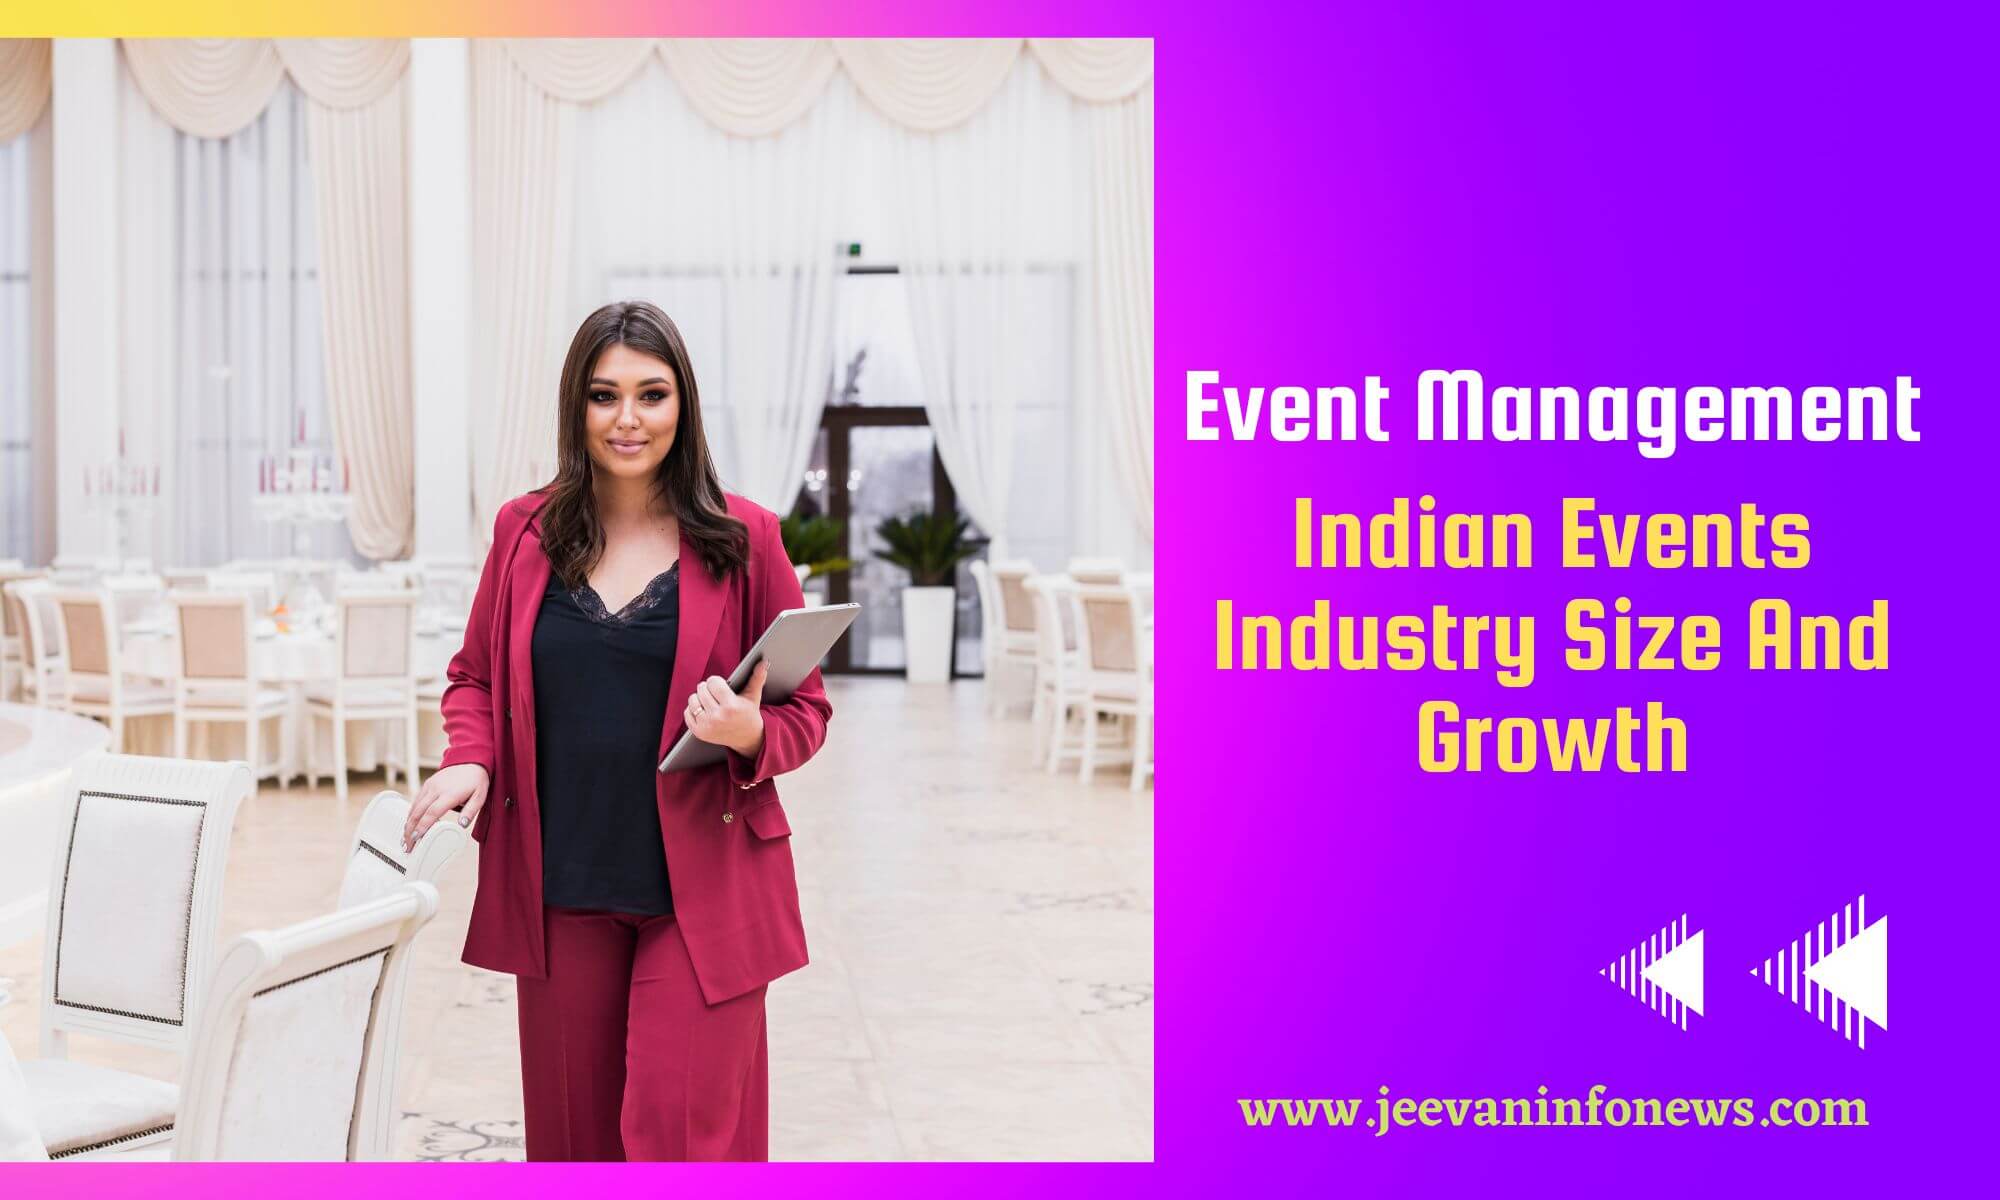 Event Management - Indian Events Industry Size And Growth